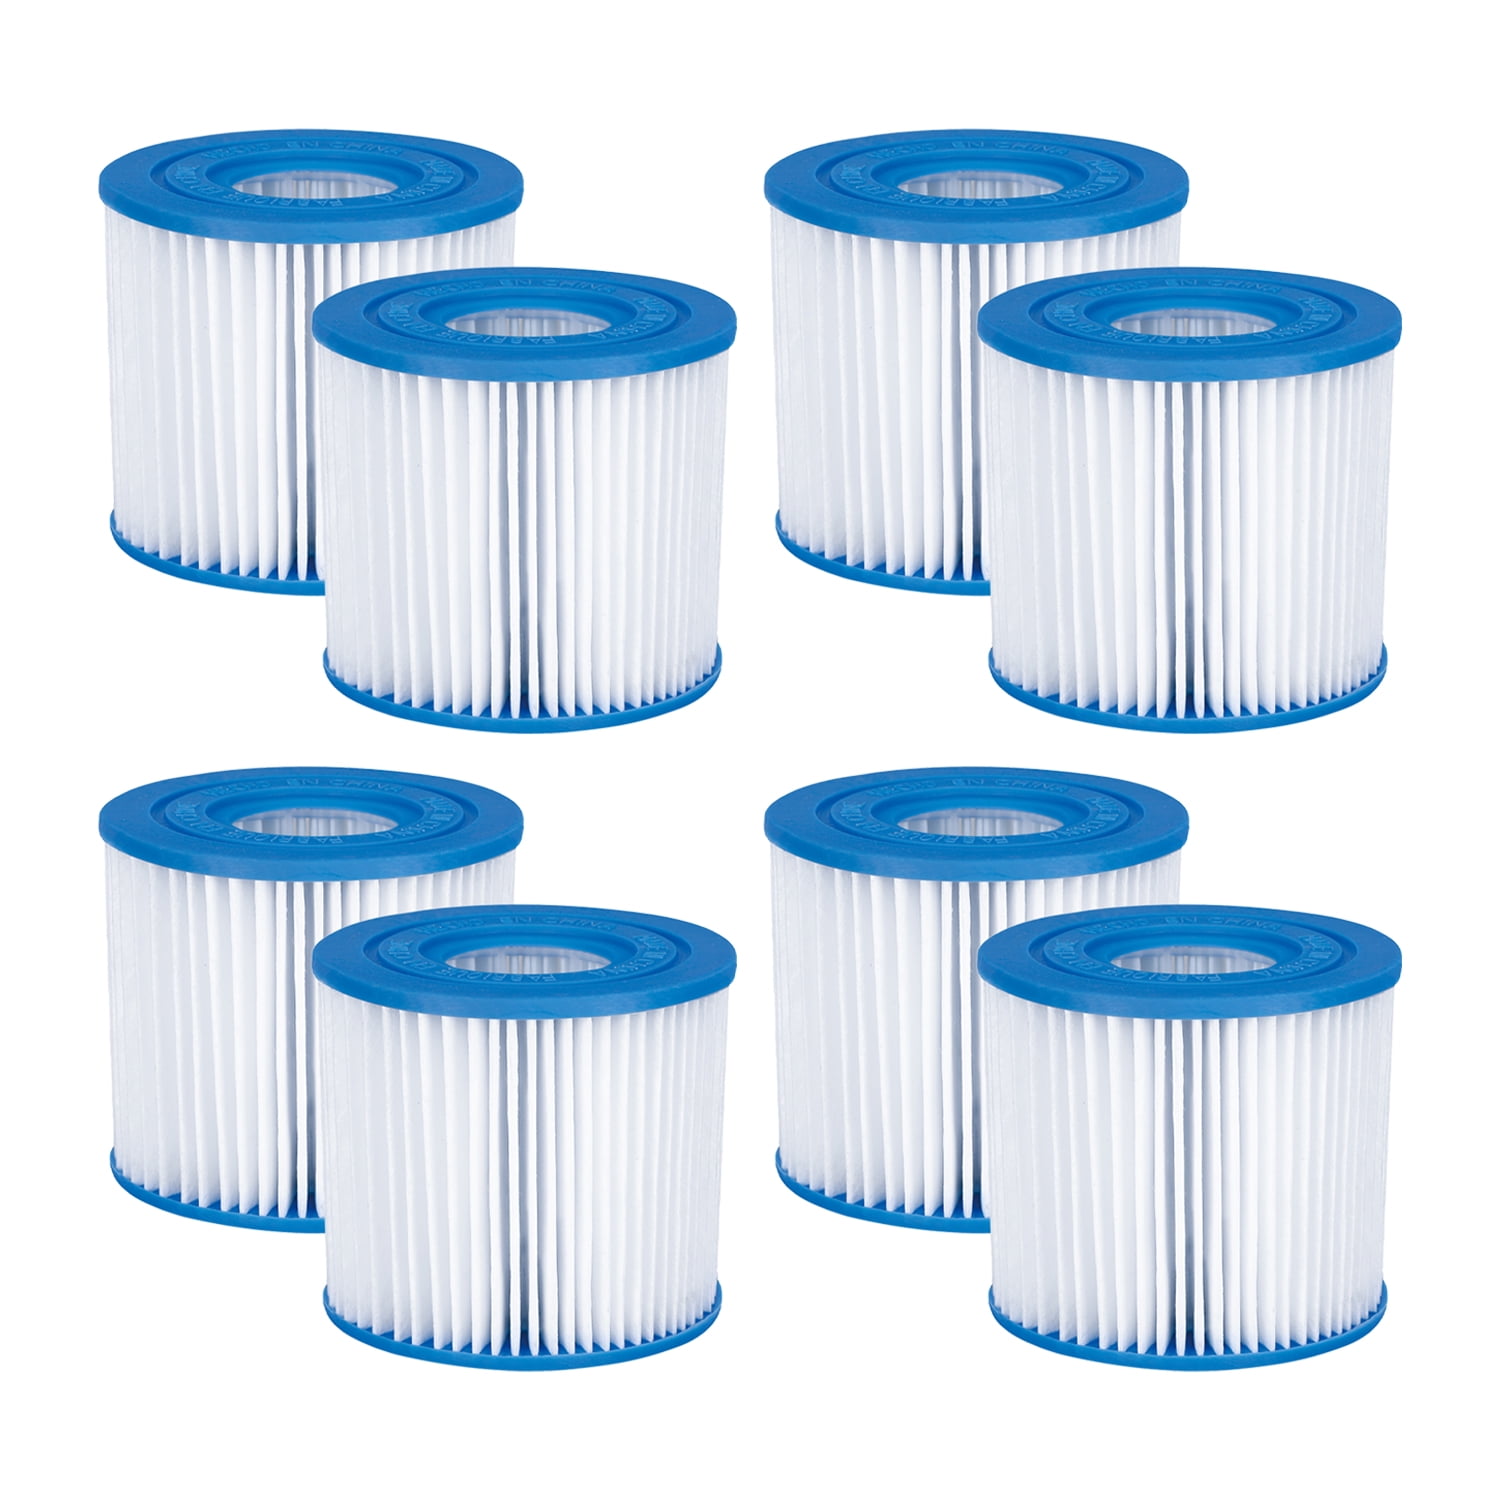 Summer Waves P57100402 Replacement Type I Pool & Spa Filter Cartridge 10 Pack 